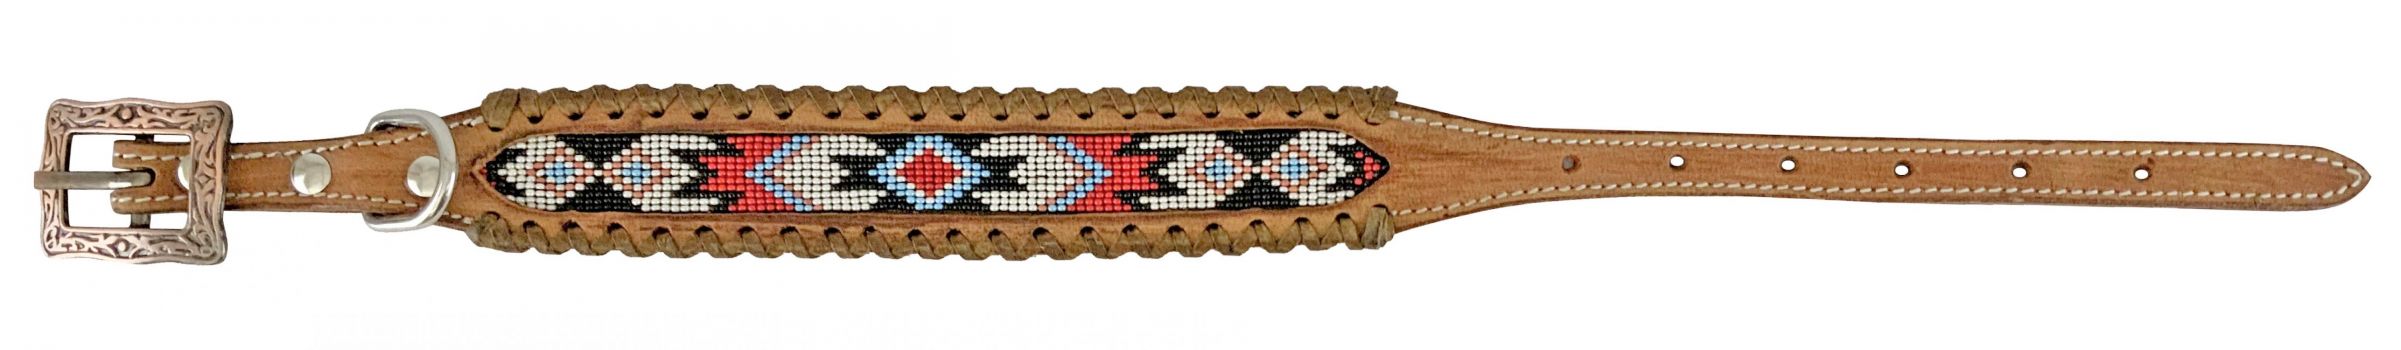 Showman Couture Genuine leather dog collar with beaded inlay - red, white, and black